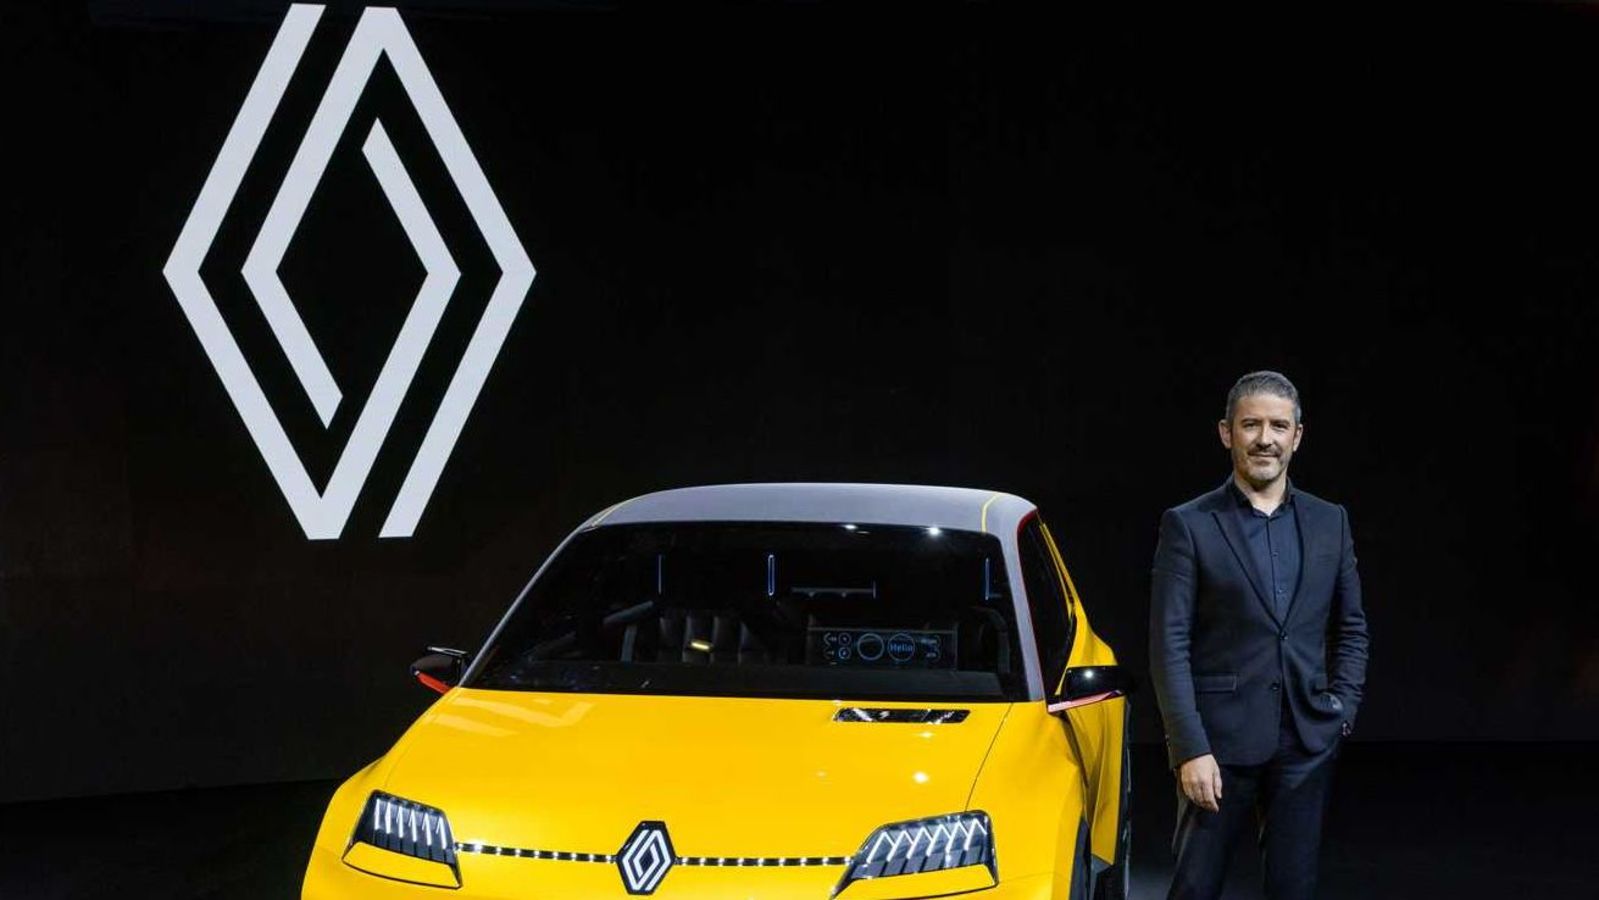 Renault In Its New Attire: Unveils A New Logo